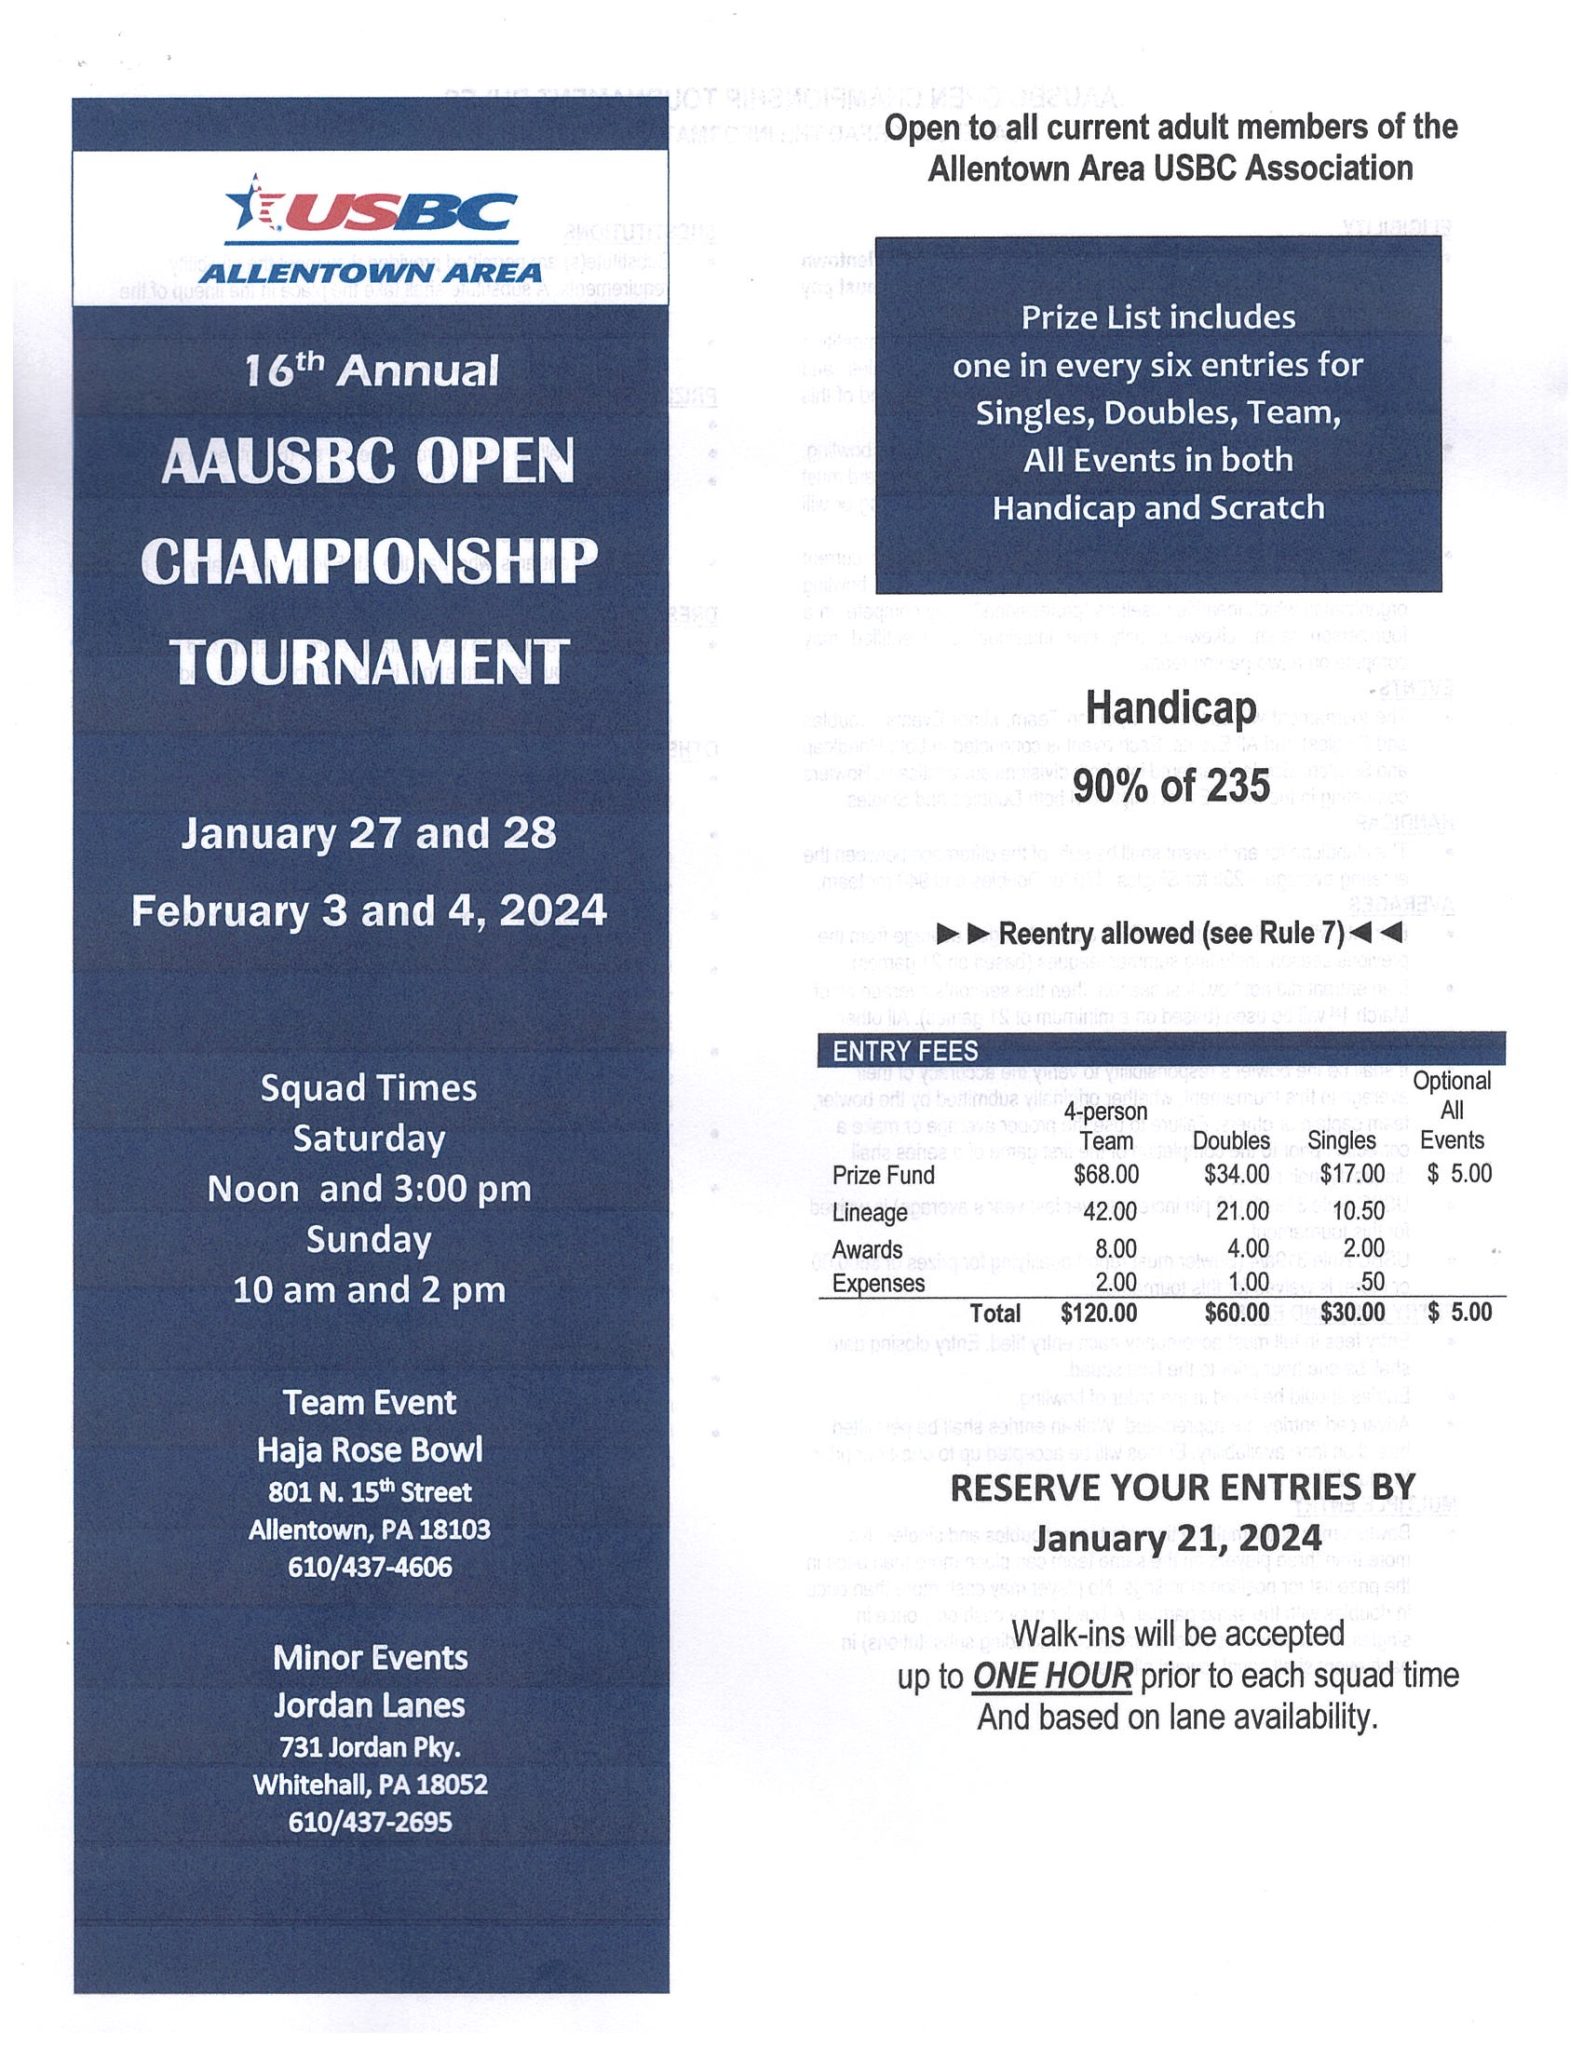 16th Annual AAUSBC Open Championship Tournament 8